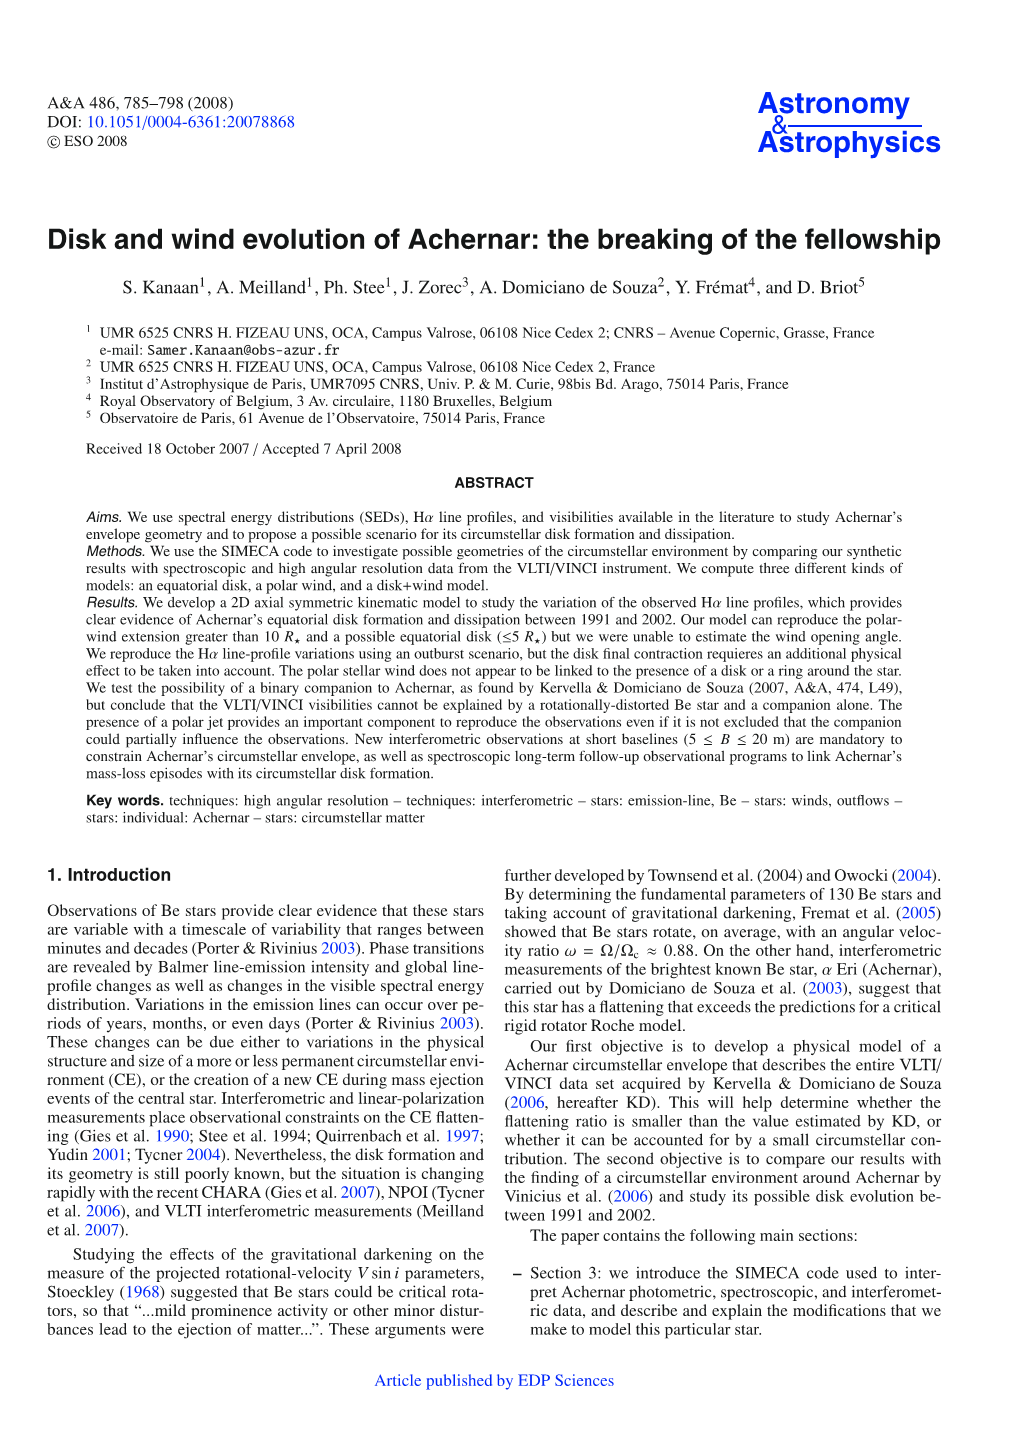 Disk and Wind Evolution of Achernar: the Breaking of the Fellowship